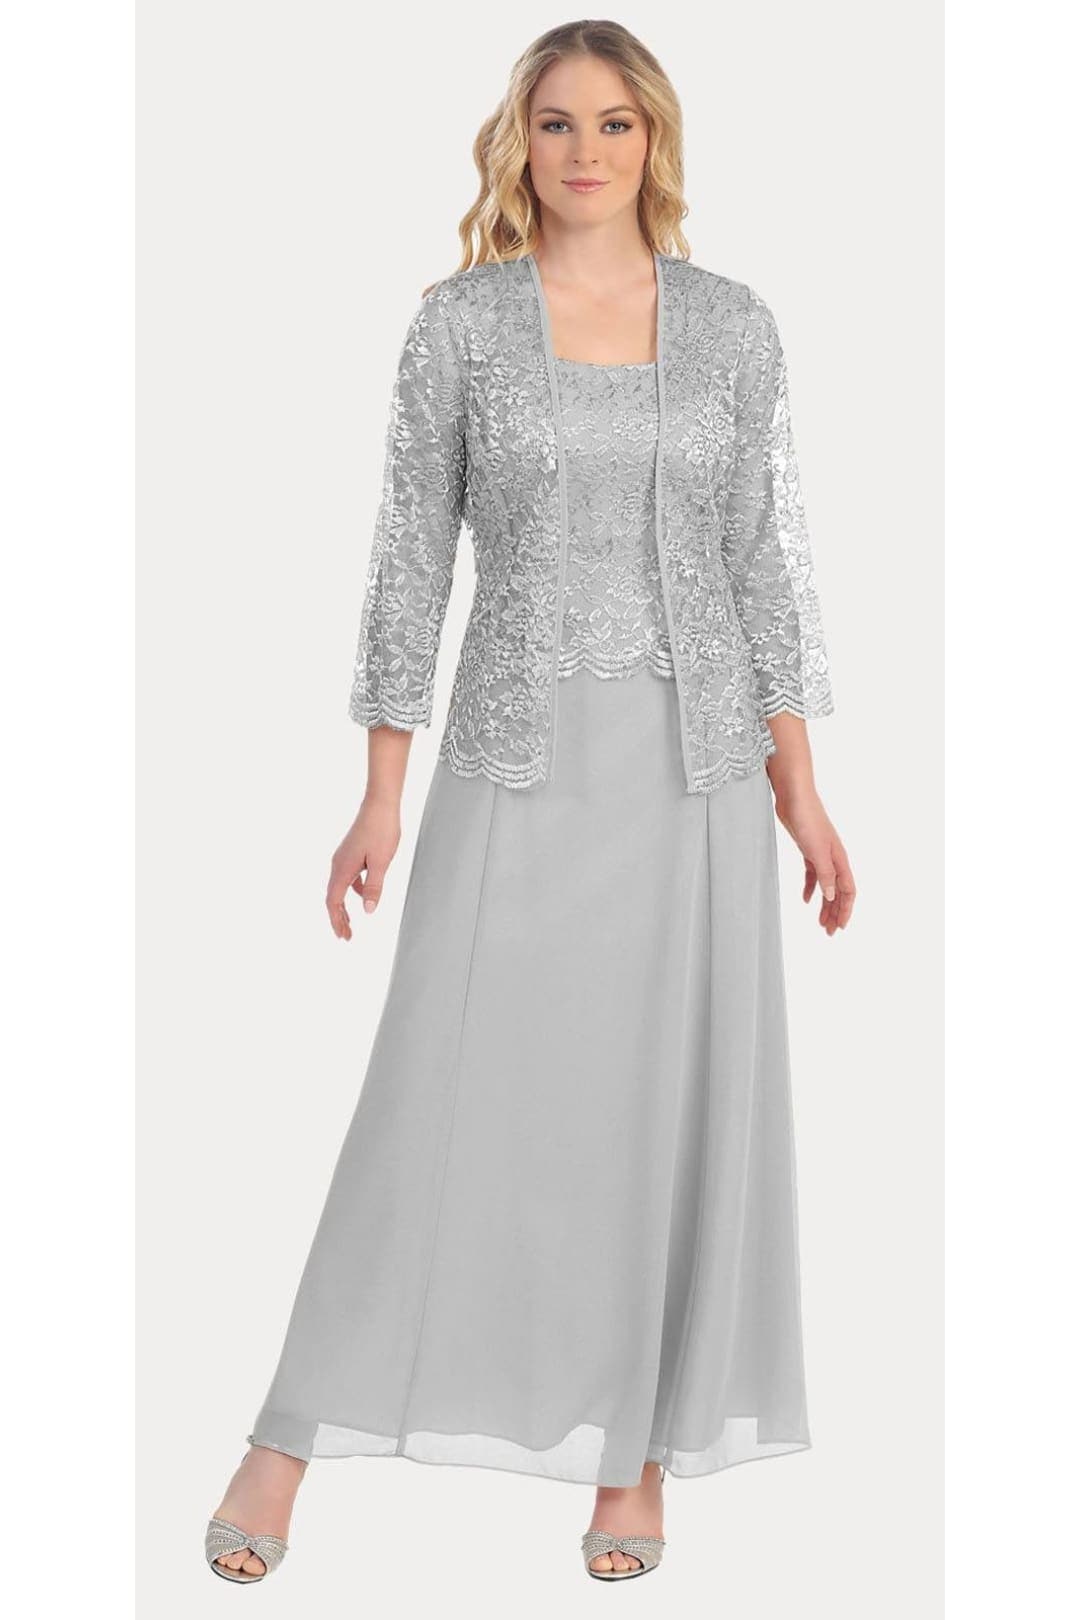 J&J Fashion 8466 Classy Mother Of The Bride Dress - SILVER / M